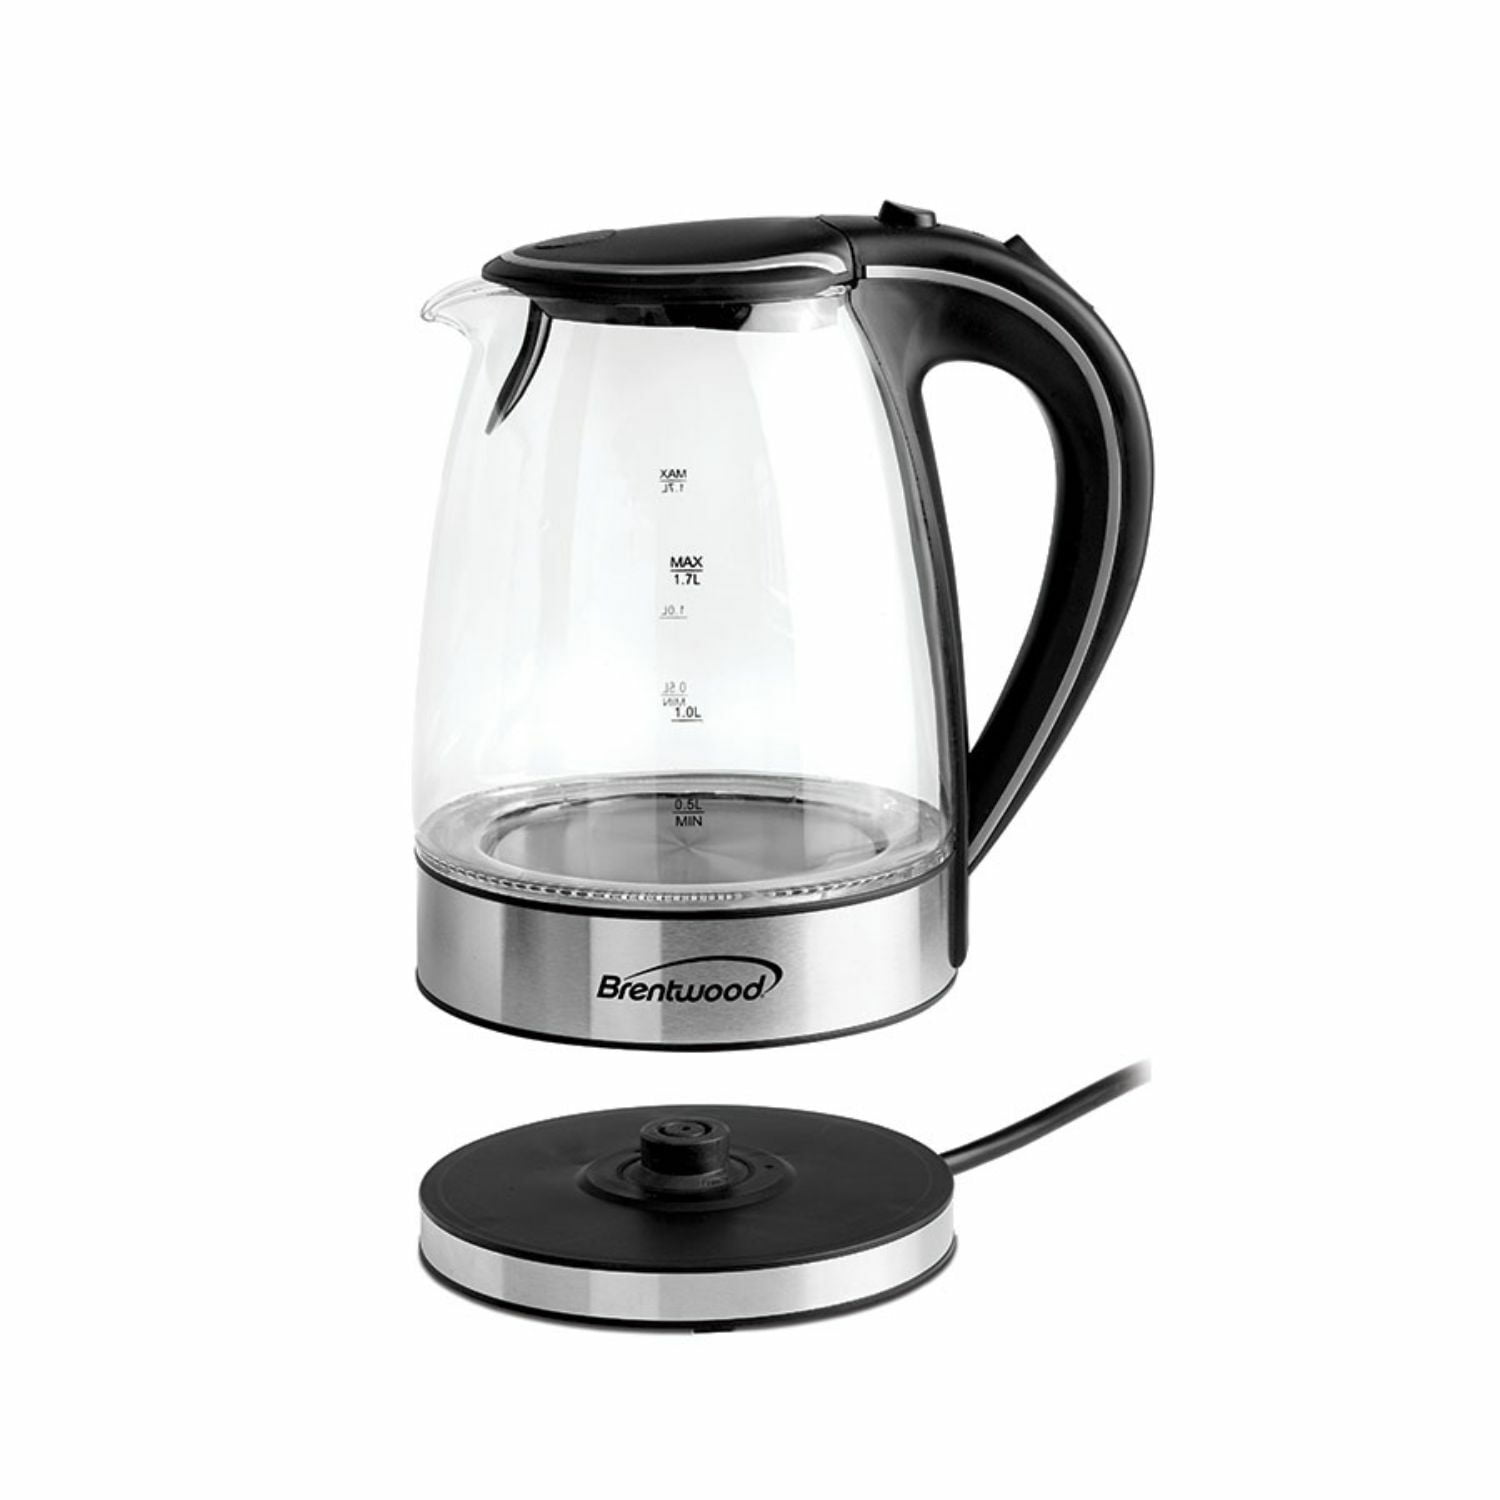 Brentwood Kt-1982dbk 1.79-Qt. Cordless Digital Glass Electric Kettle with 6 Precise Temperature Presets and Swivel Base, Black